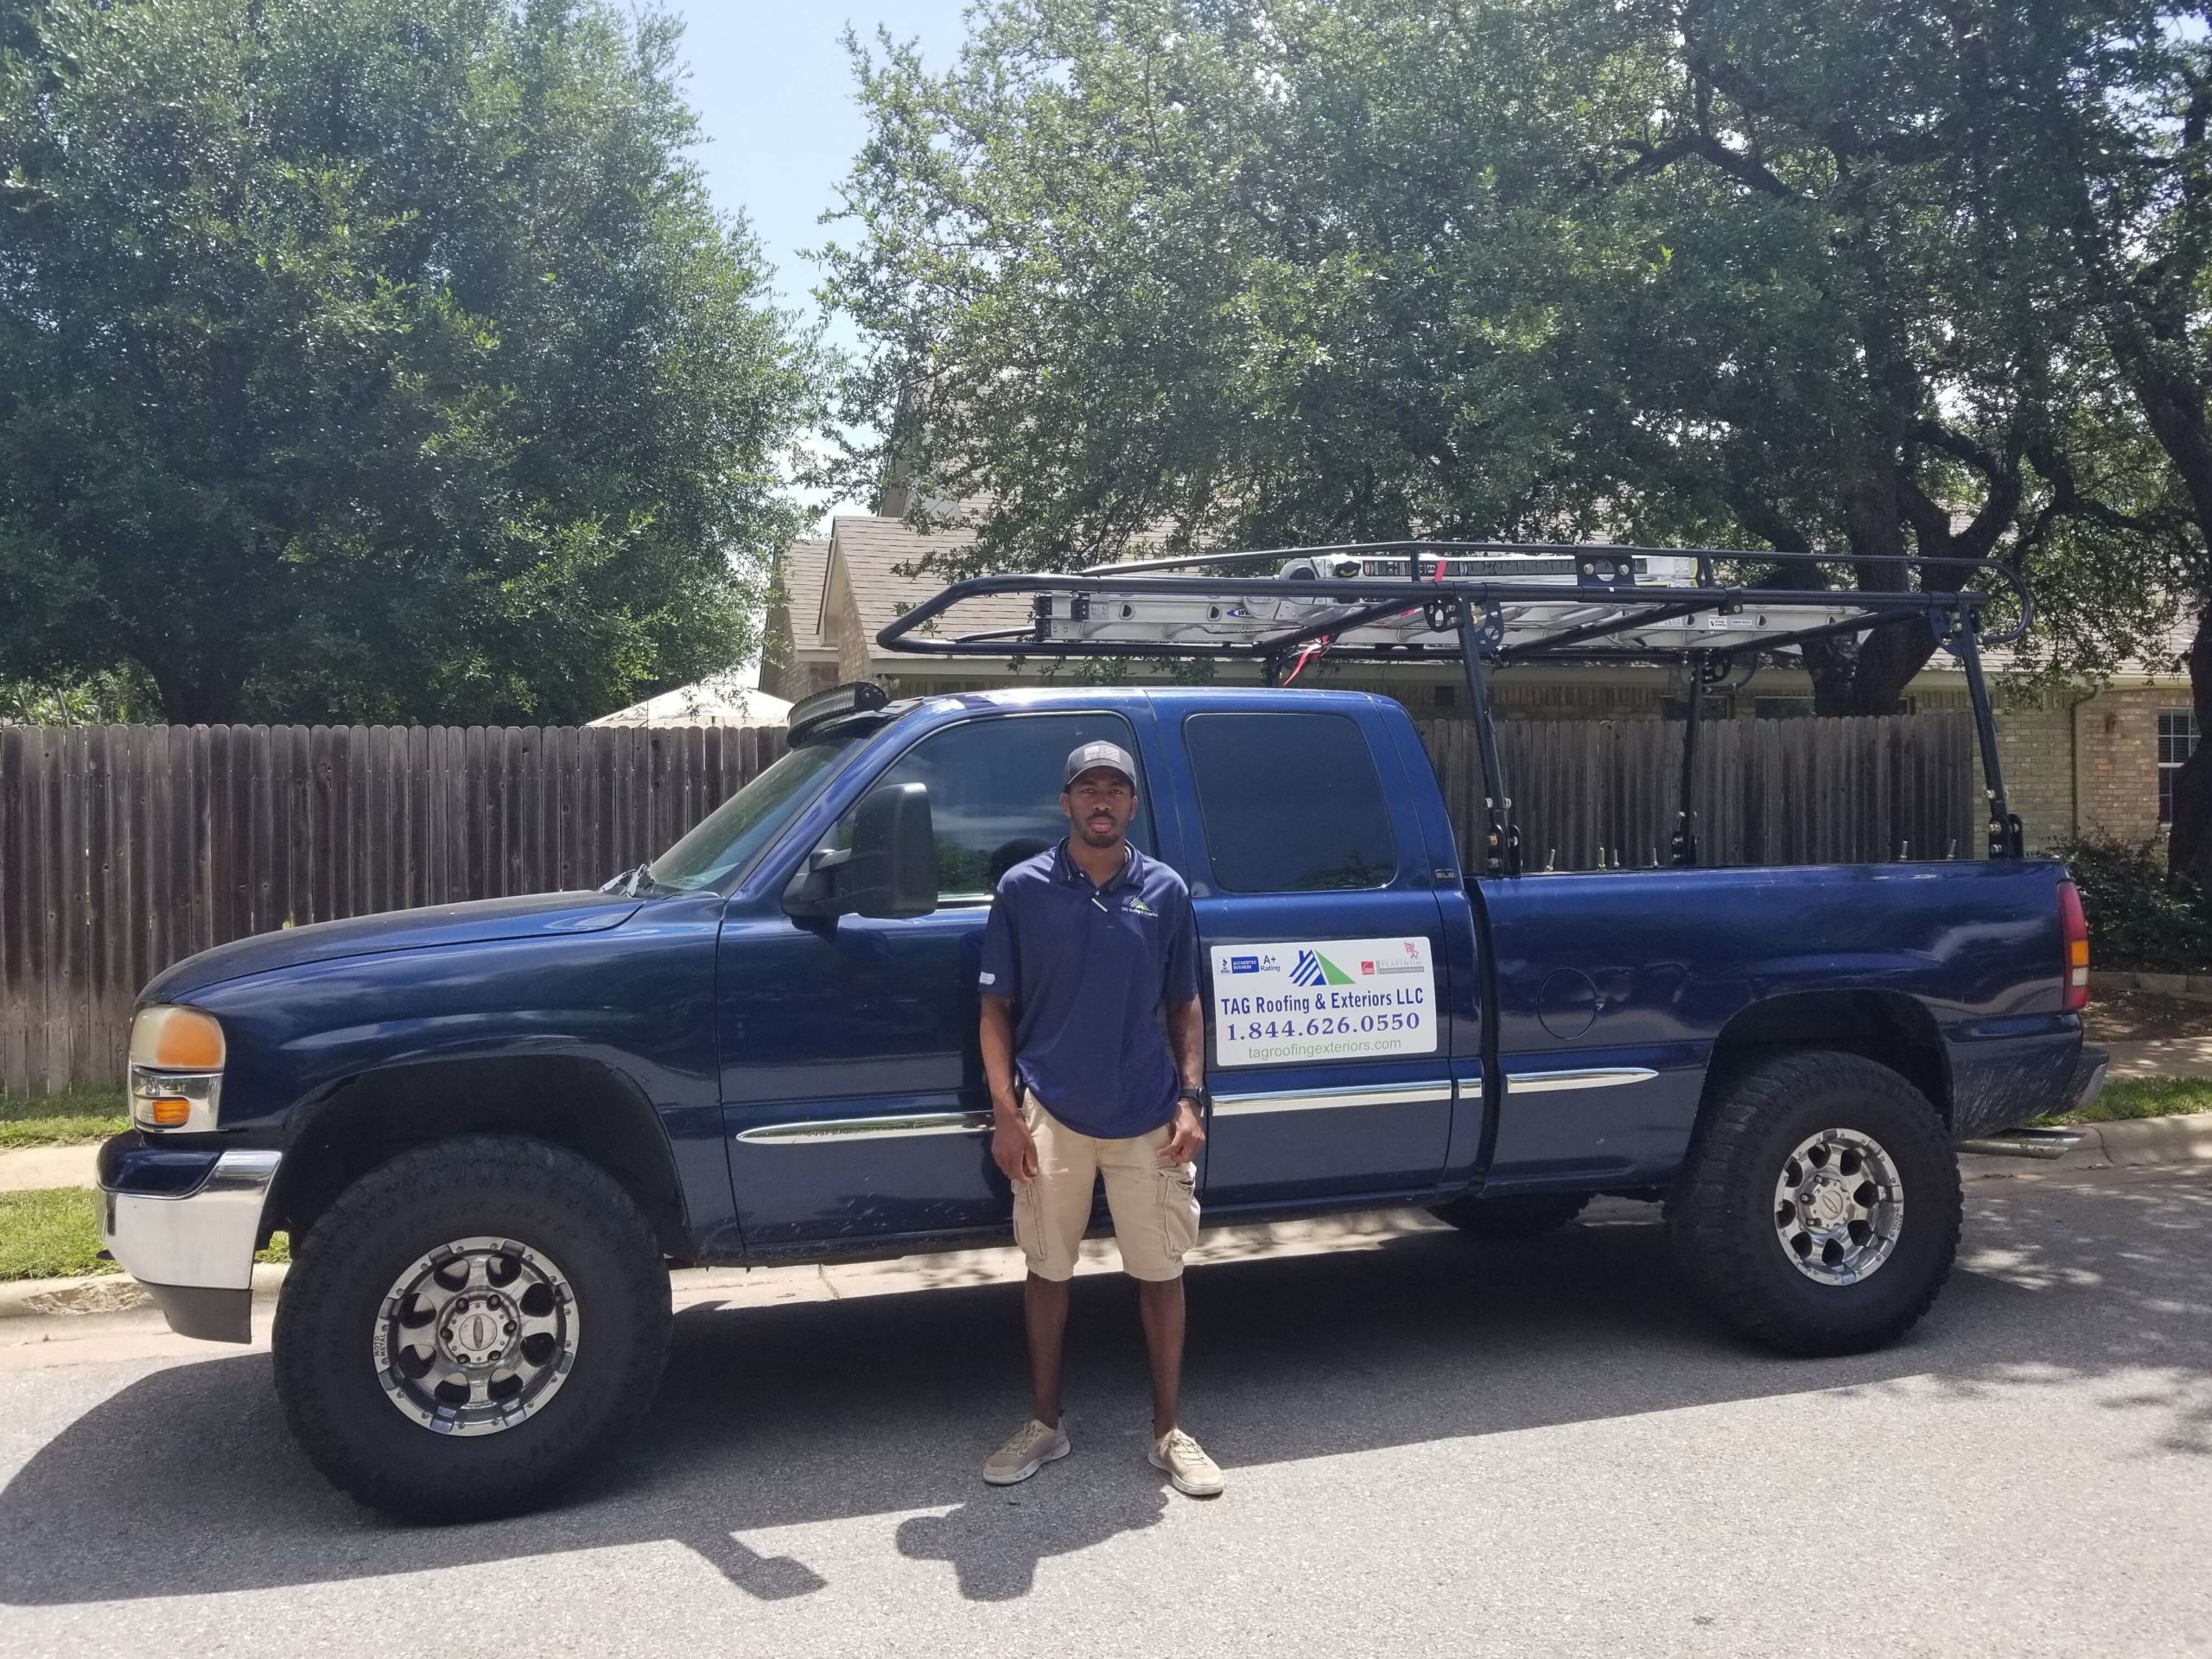 certified roofer standing next to a Tag Roofing truck.